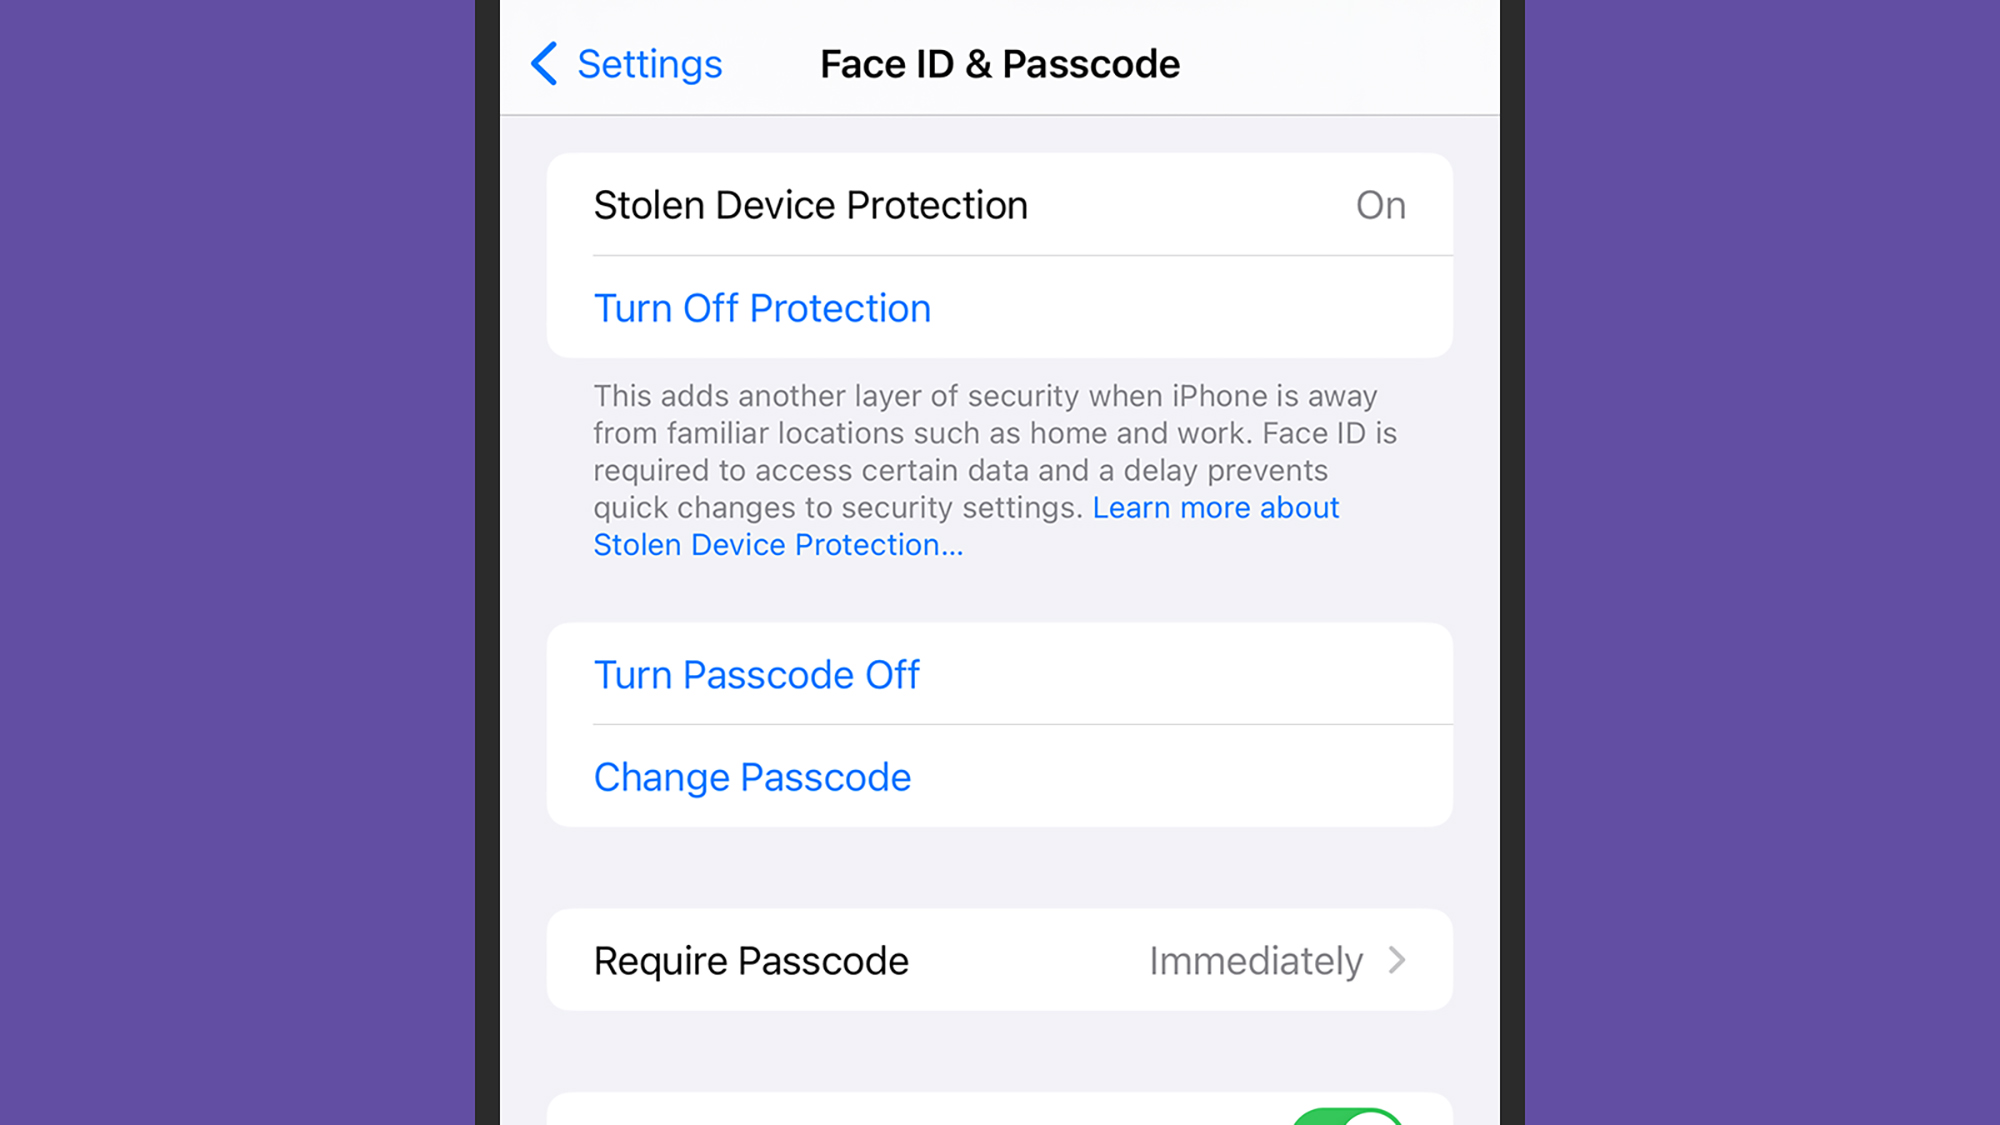 Turn on iOS Stolen Device Protection before your phone disappears. Credit: David Nield
